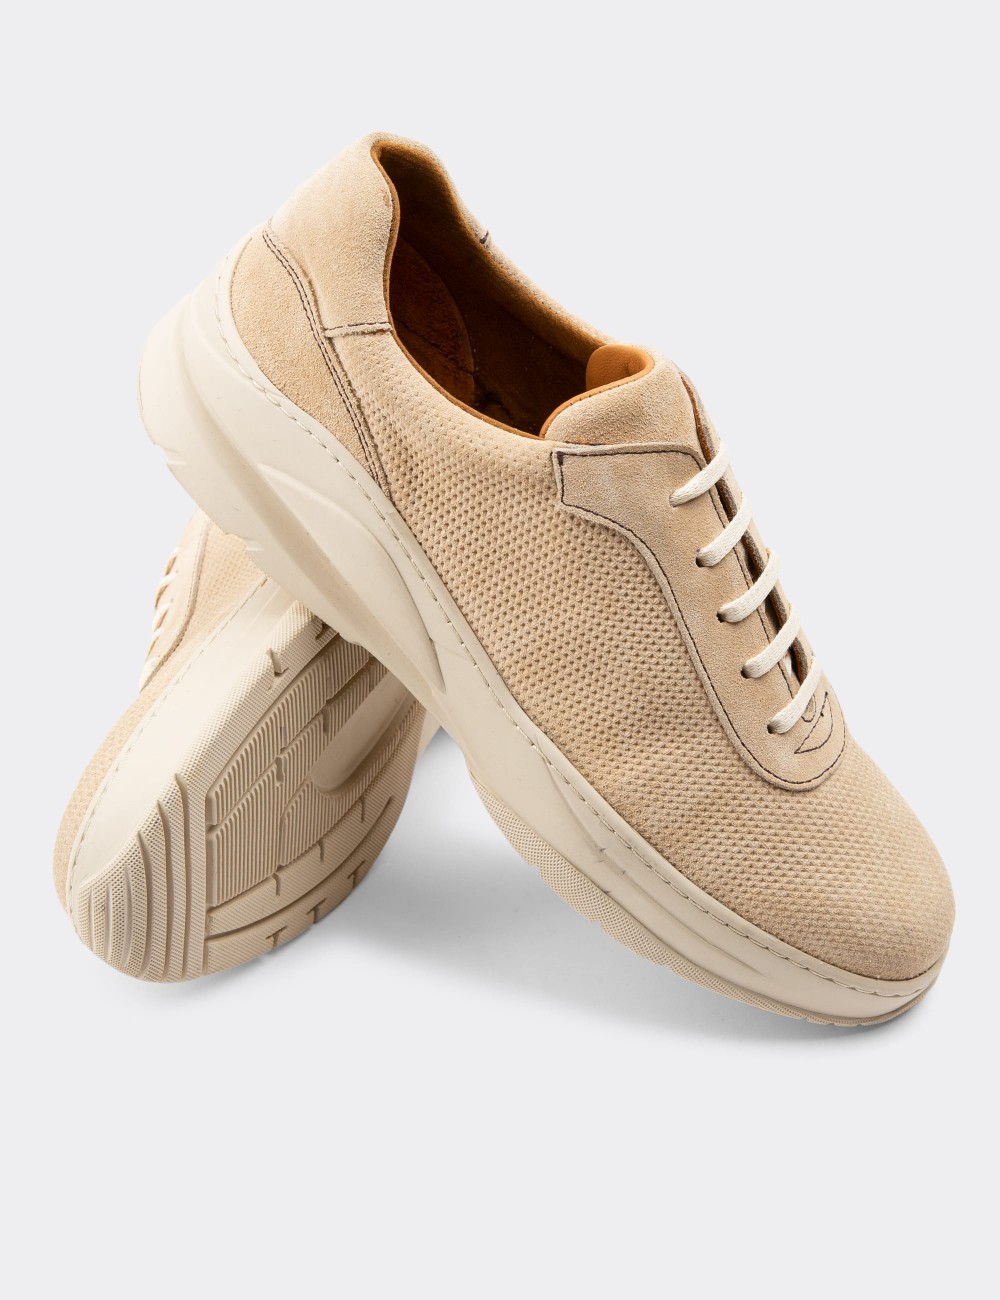 Beige Suede Leather Sneakers - 01879MBEJC03